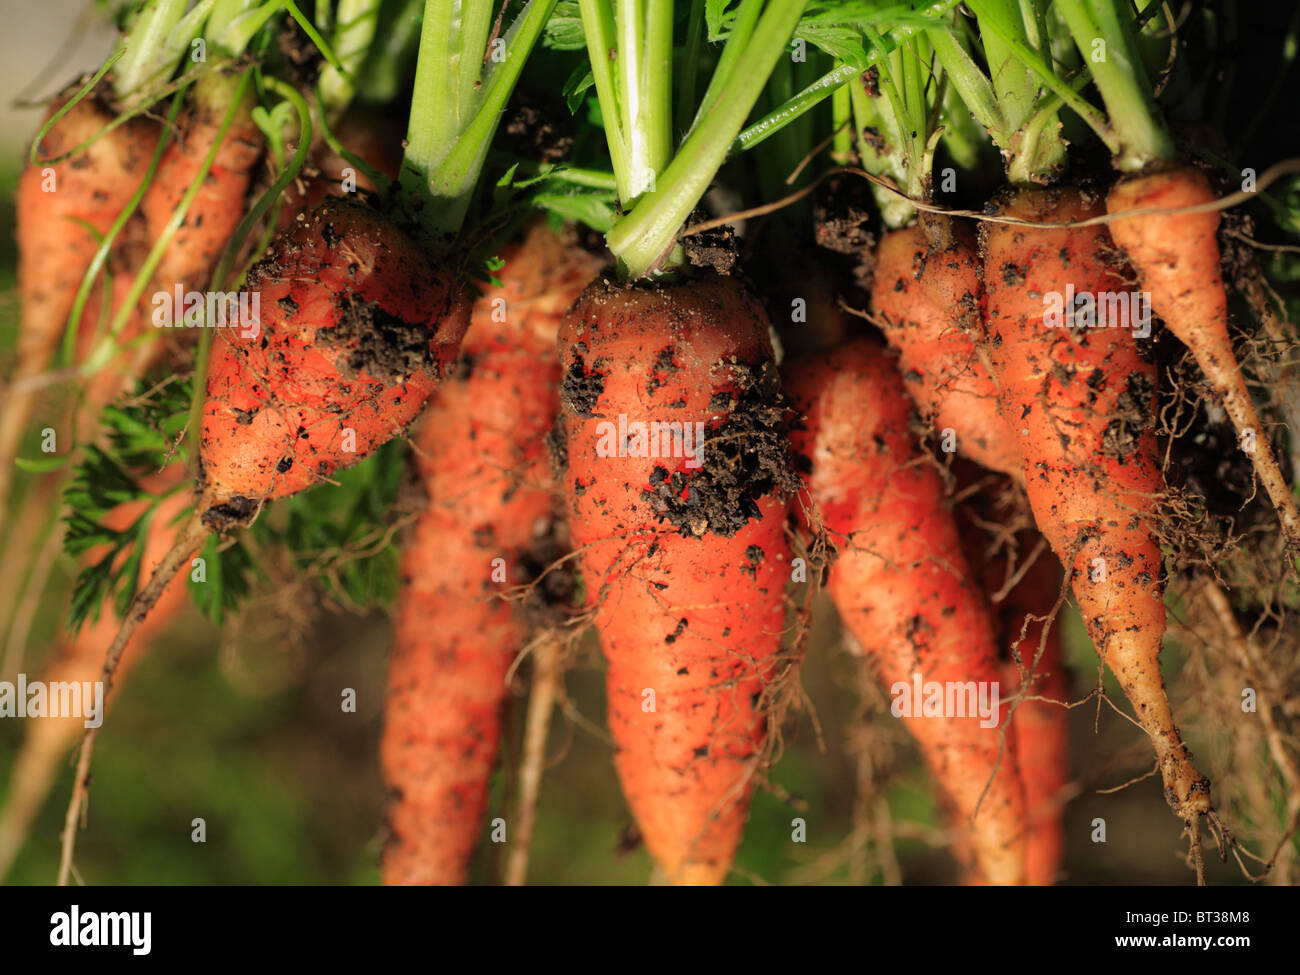 Freshly picked organic homegrown carrots. Stock Photo